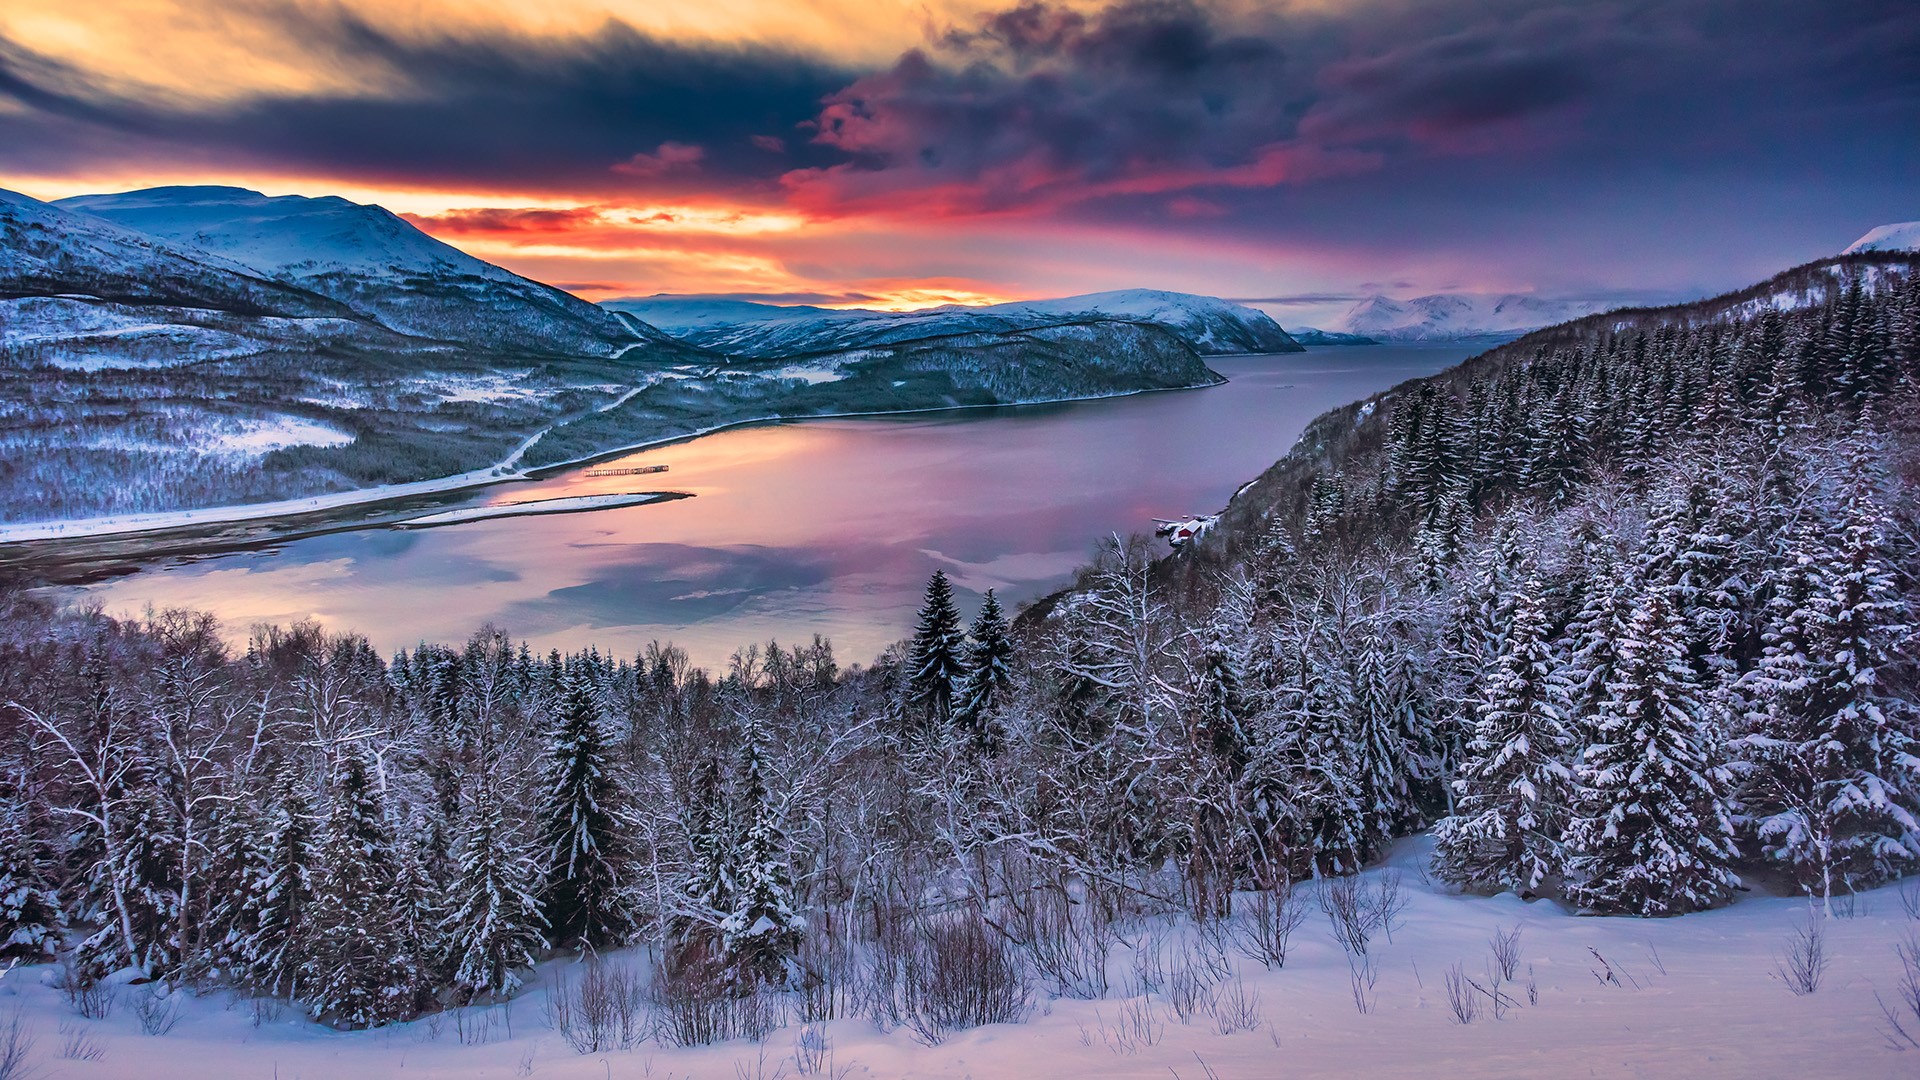 General 1920x1080 nature landscape snow dawn clouds sky trees forest water snowy mountain plants river Norway winter